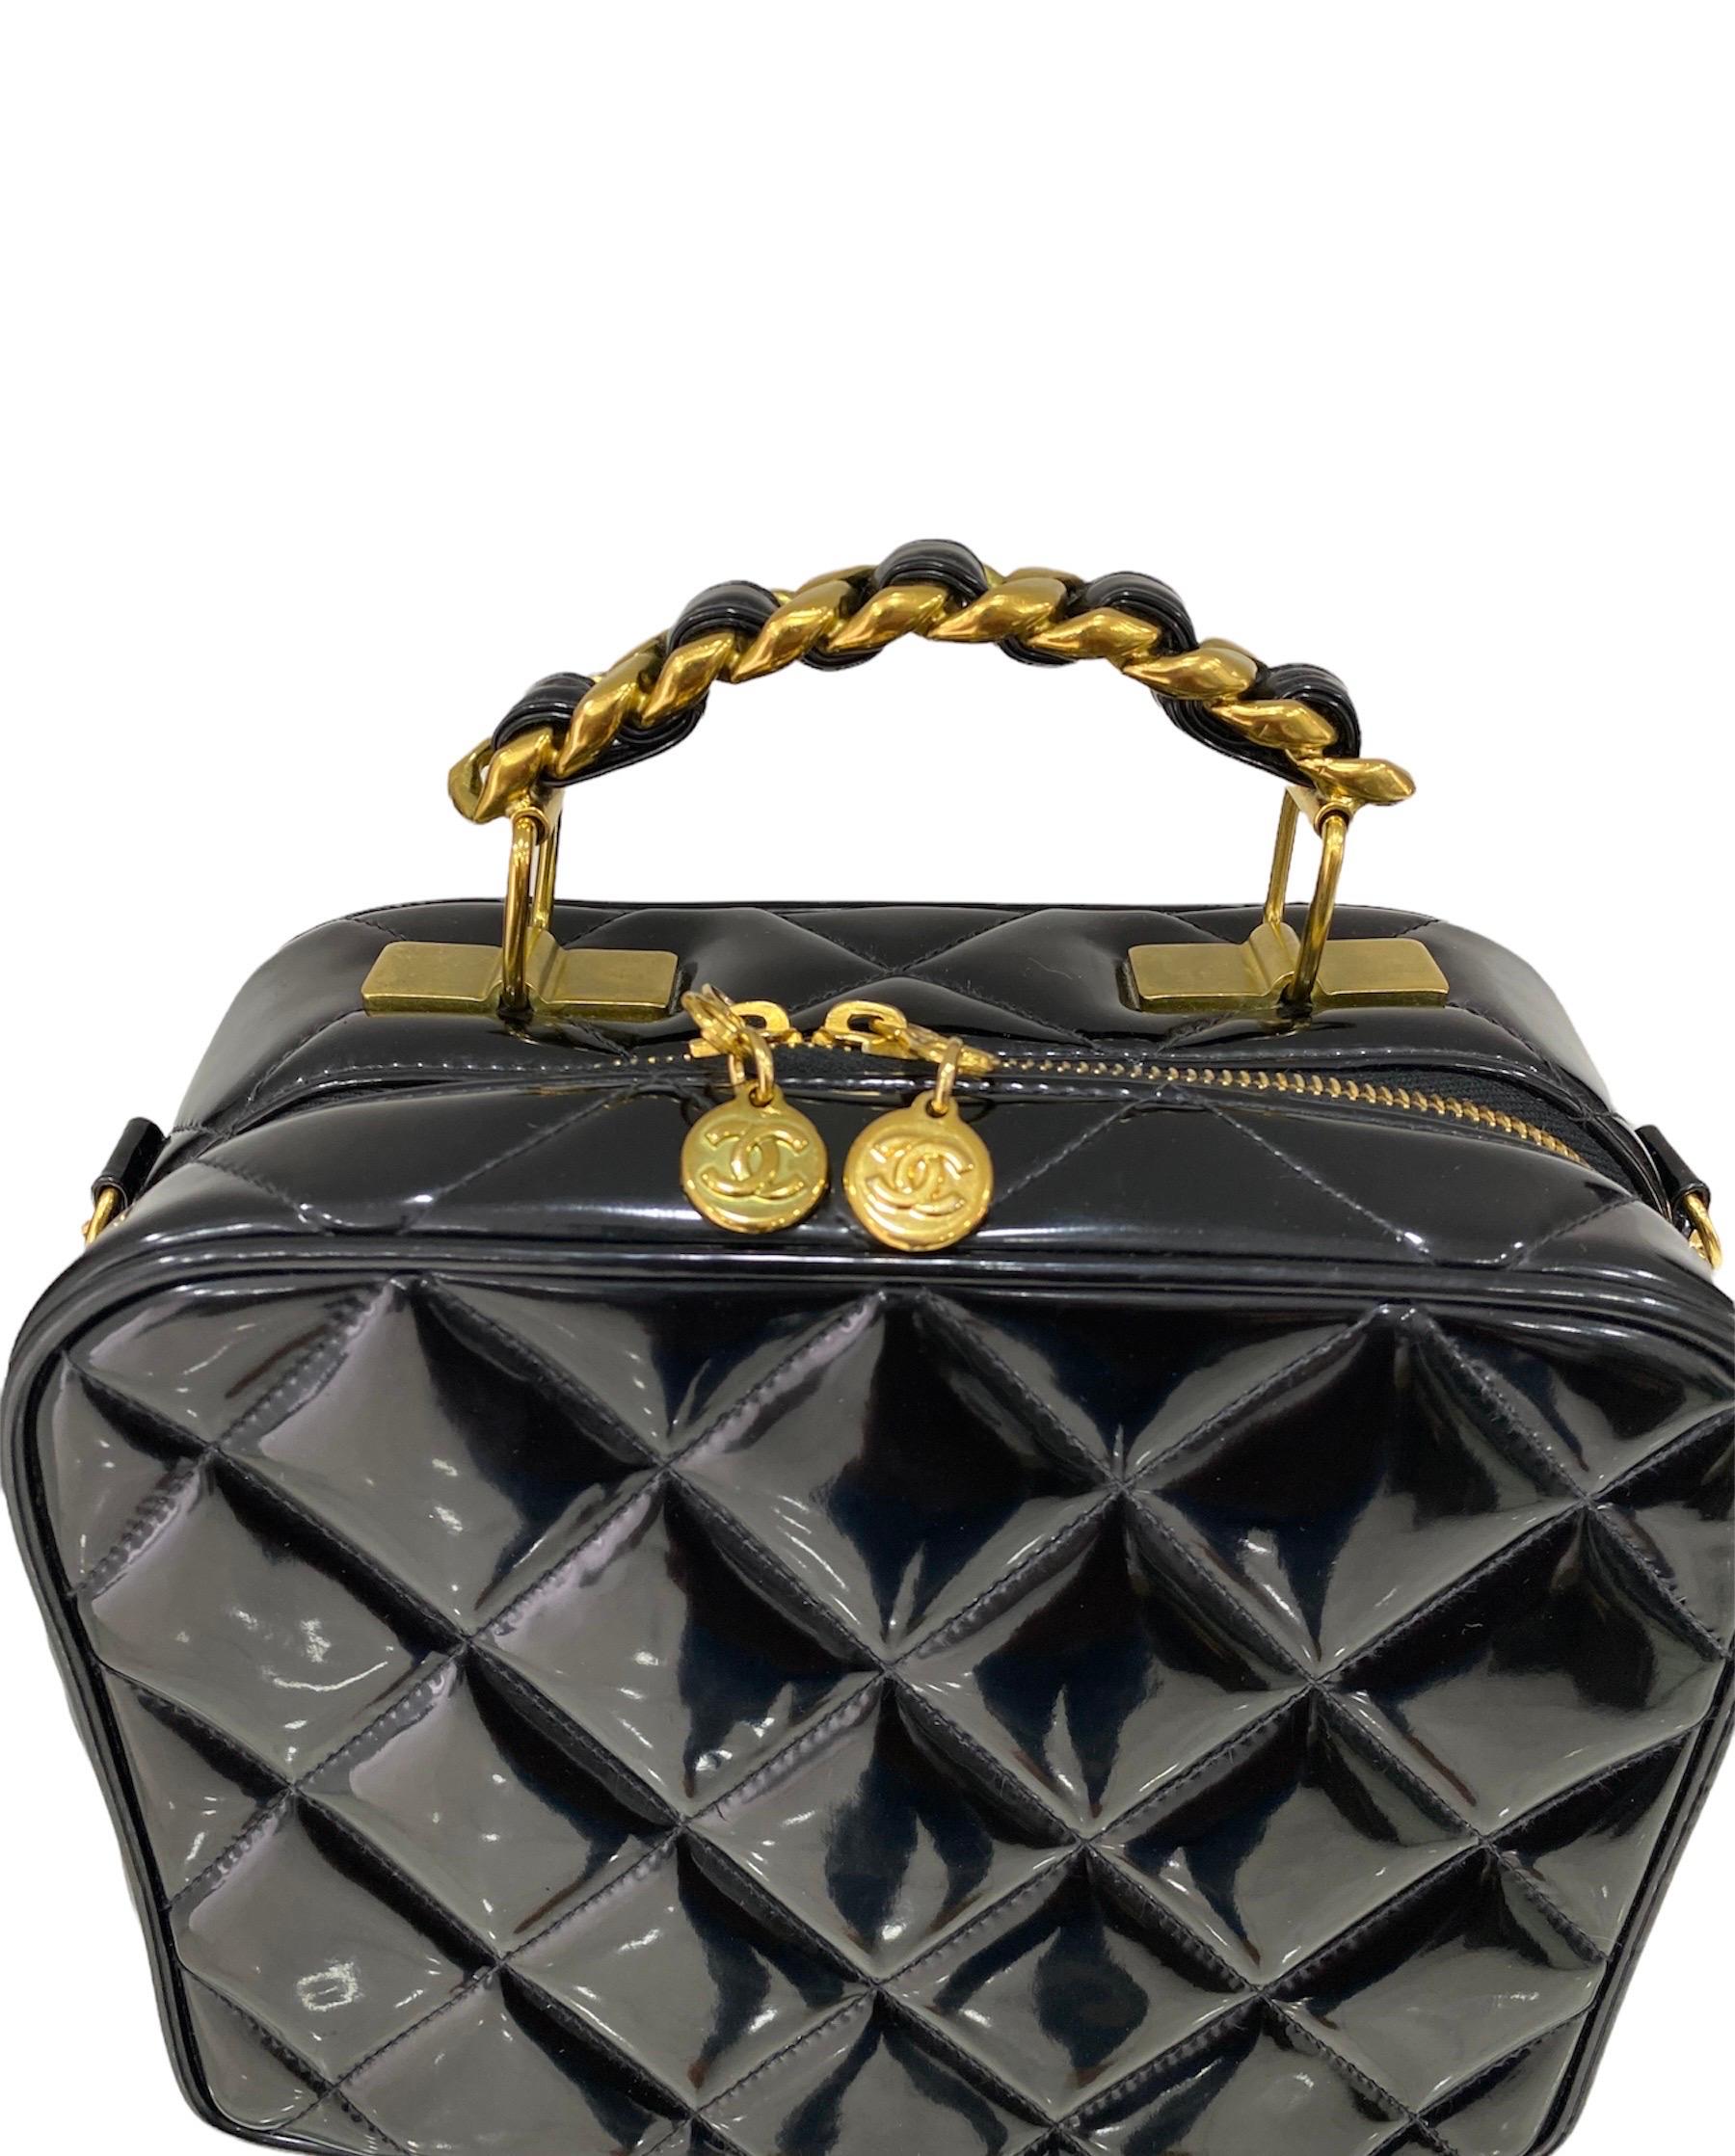 Chanel signed bag, vintage model, year of production 94/96, made in black patent leather with gold hardware.
This iconic model is equipped with a circular zip closure, internally lined in smooth black leather, quite roomy.
Equipped with a removable